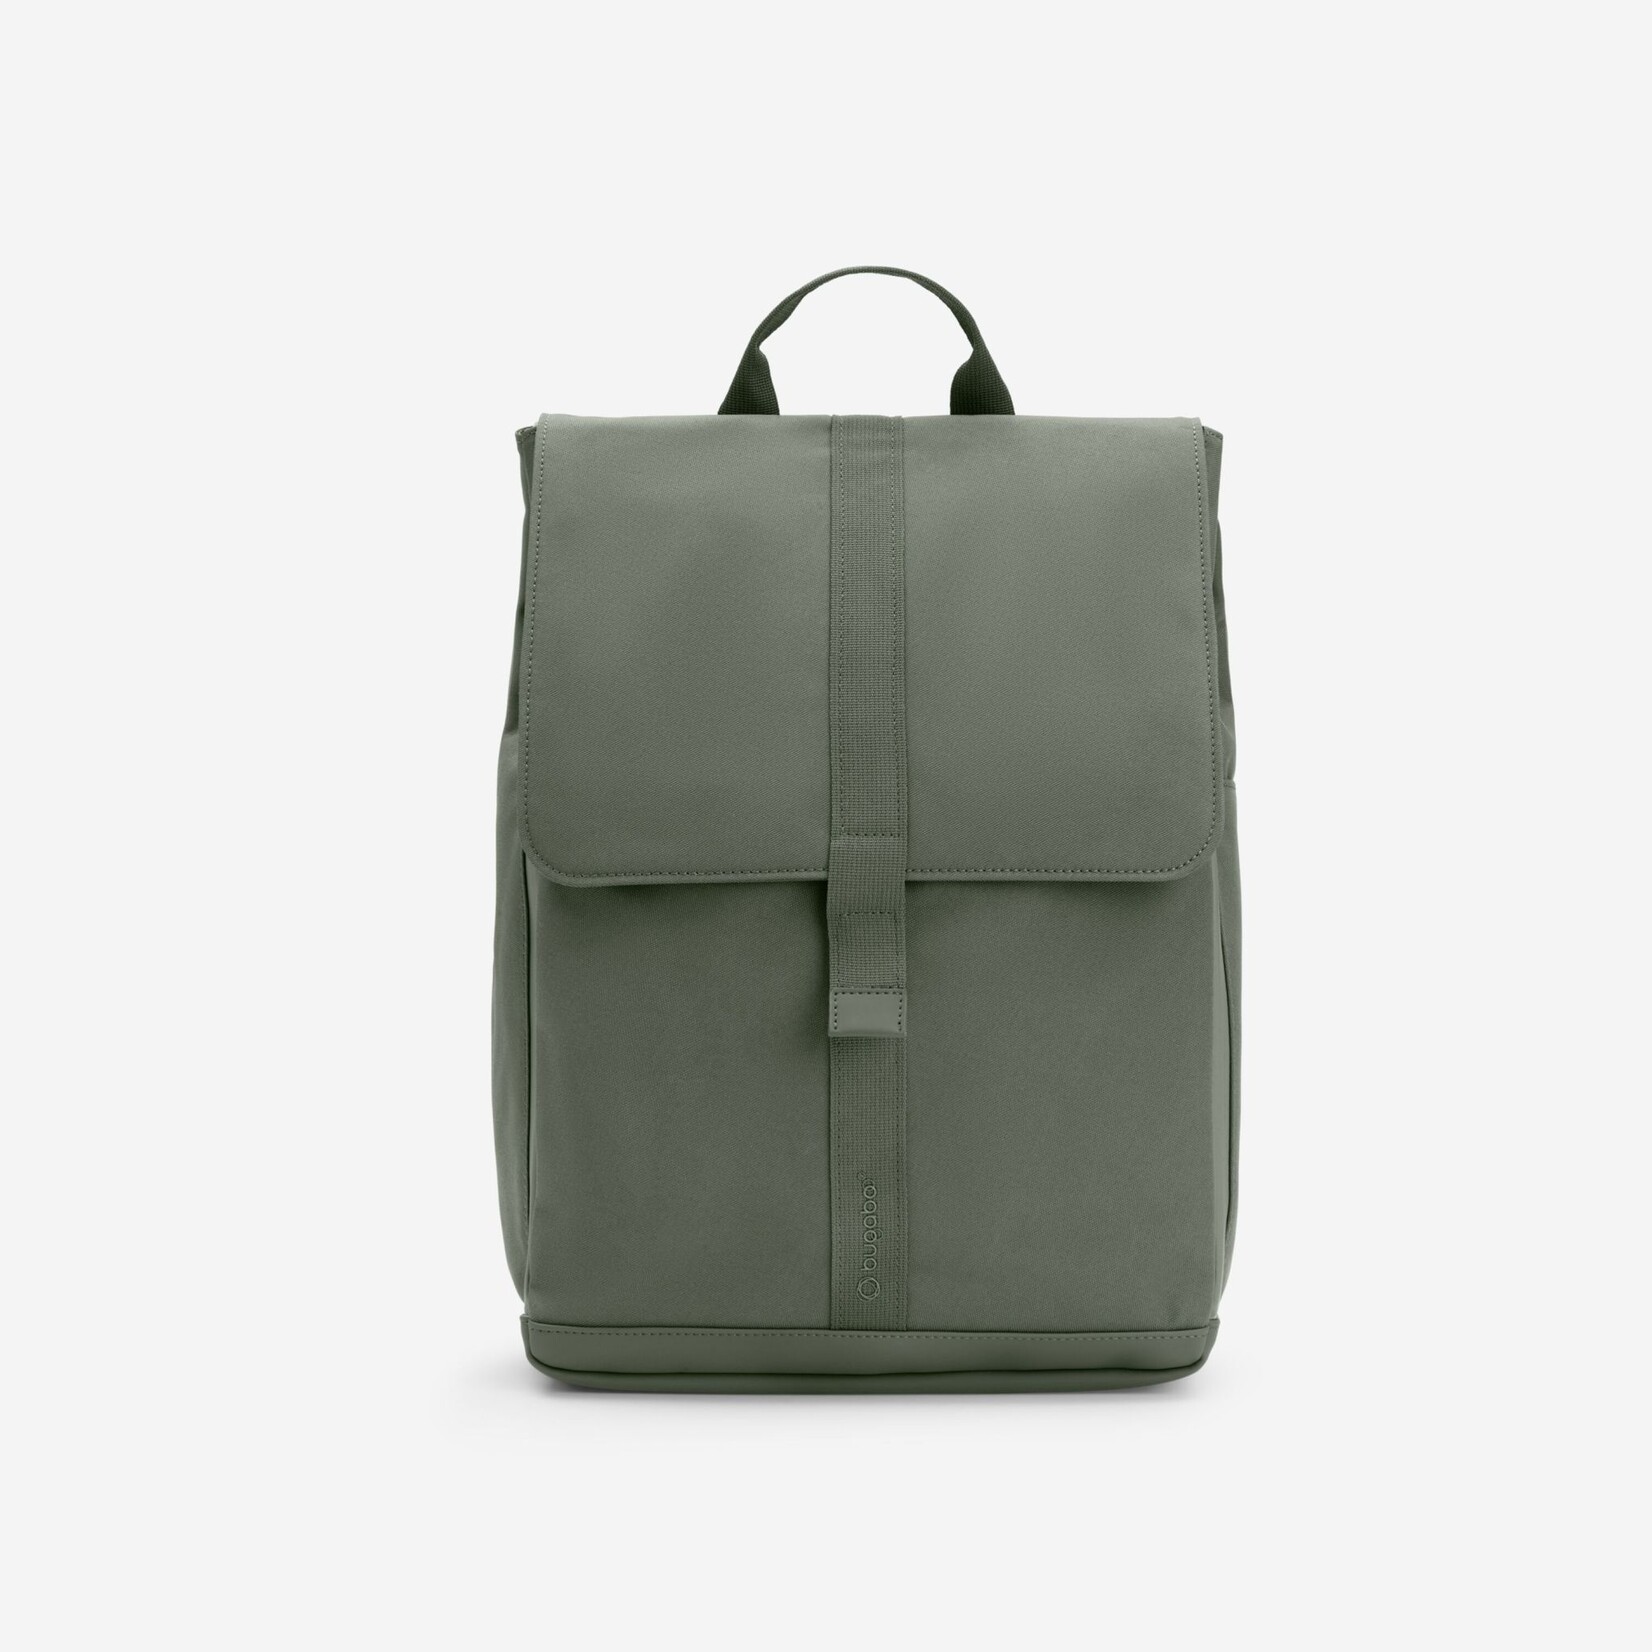 Bugaboo changing backpack-Forest green